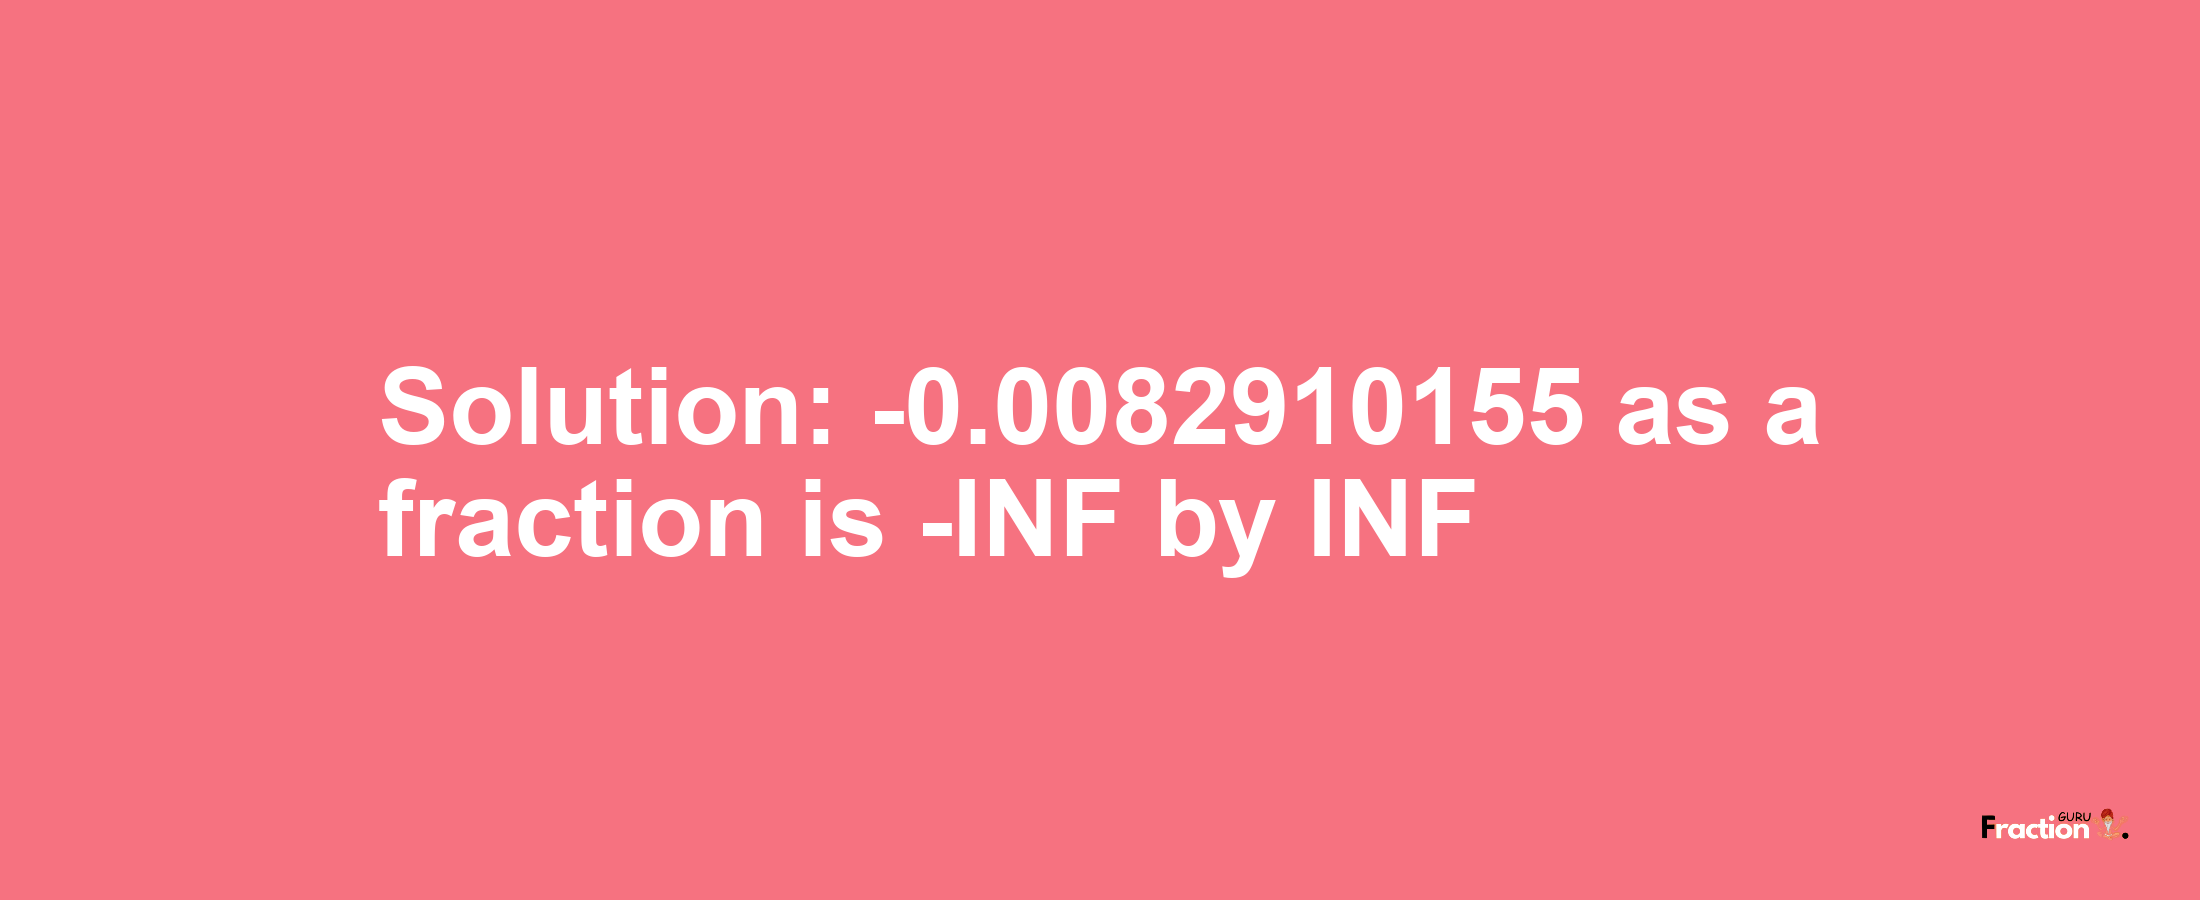 Solution:-0.0082910155 as a fraction is -INF/INF